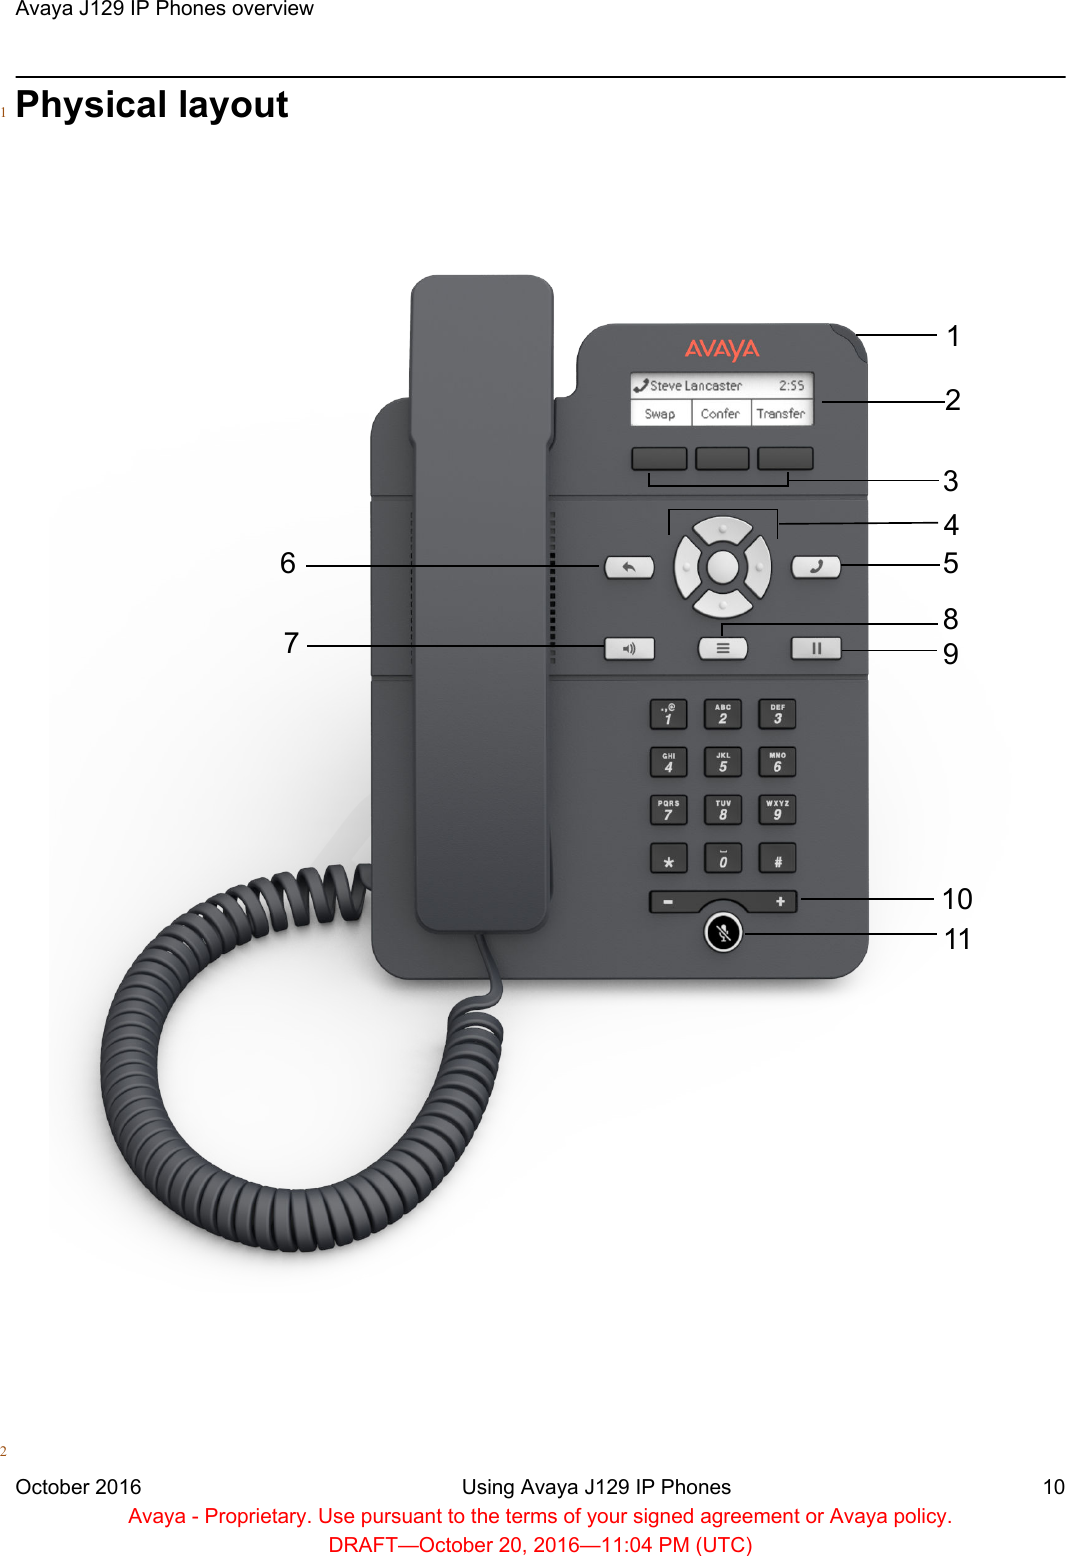 Physical layout132467589101112Avaya J129 IP Phones overviewOctober 2016 Using Avaya J129 IP Phones 10Avaya - Proprietary. Use pursuant to the terms of your signed agreement or Avaya policy.DRAFT—October 20, 2016—11:04 PM (UTC)